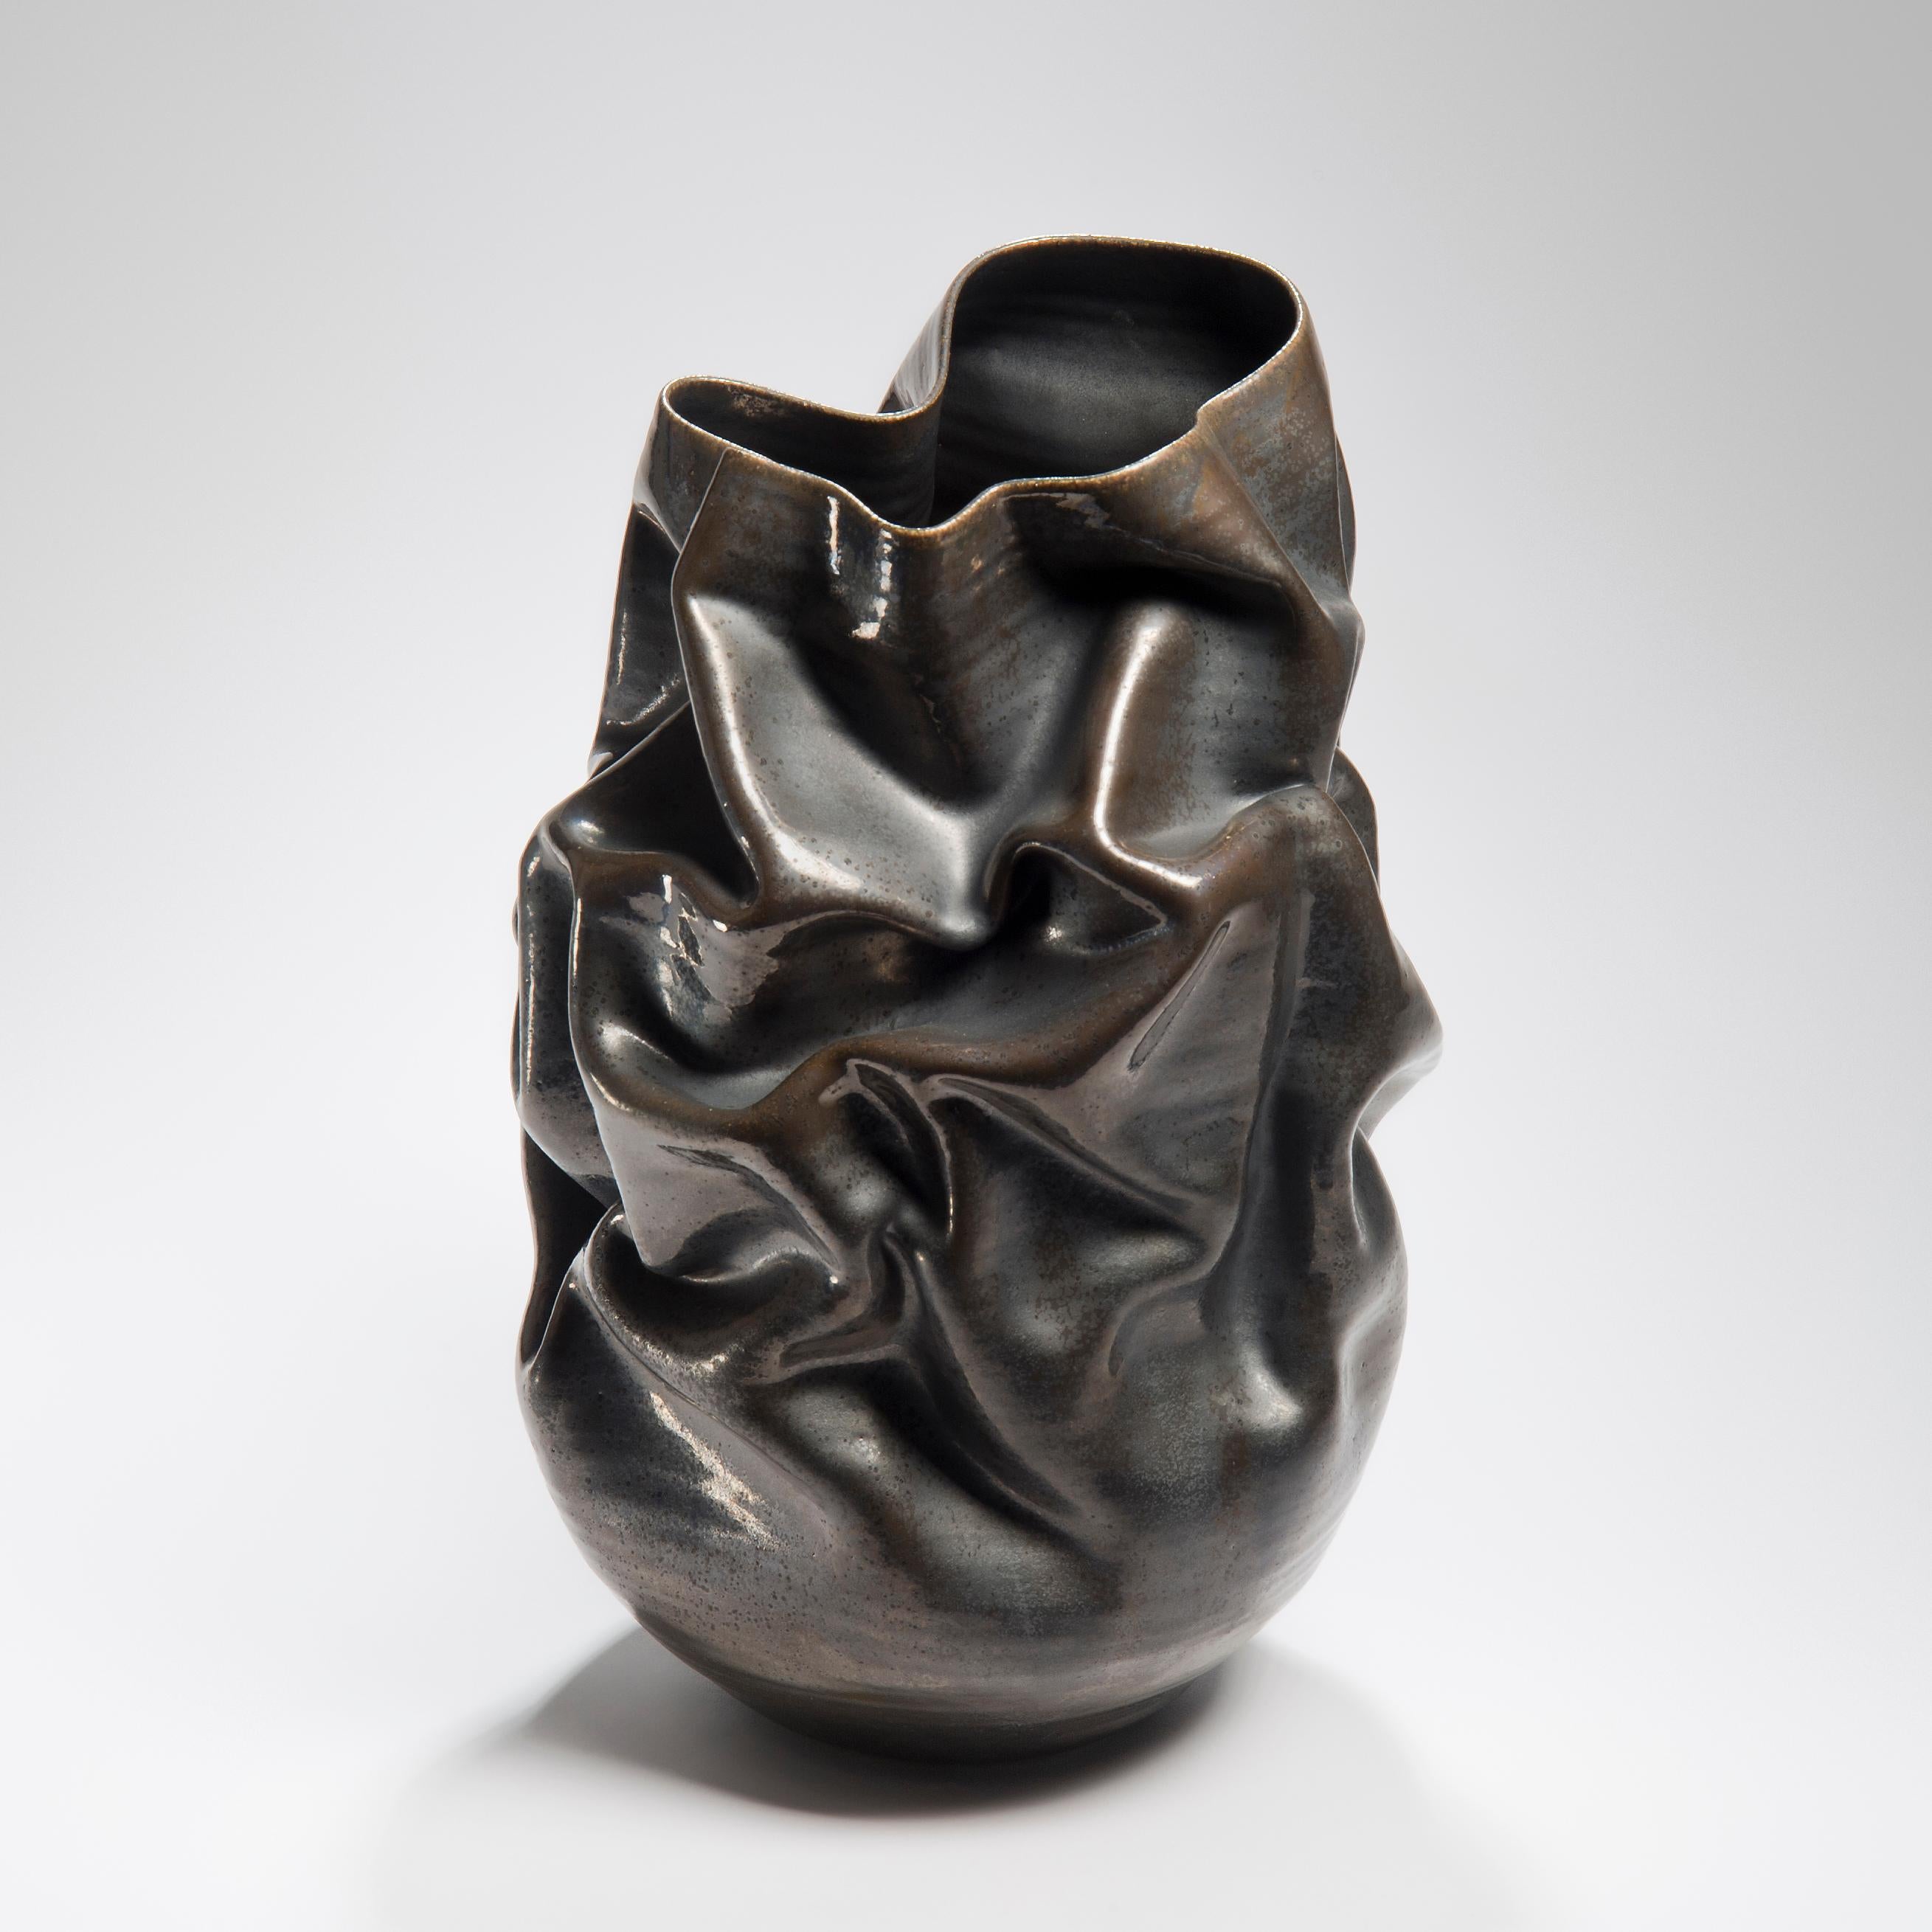 Black Metallic Crumpled Form No 32 is a unique ceramic sculptural vessel by the British artist Nicholas Arroyave-Portela.

Nicholas Arroyave-Portela’s professional ceramic practice began in 1994. After 20 years based in London, he moved and set up